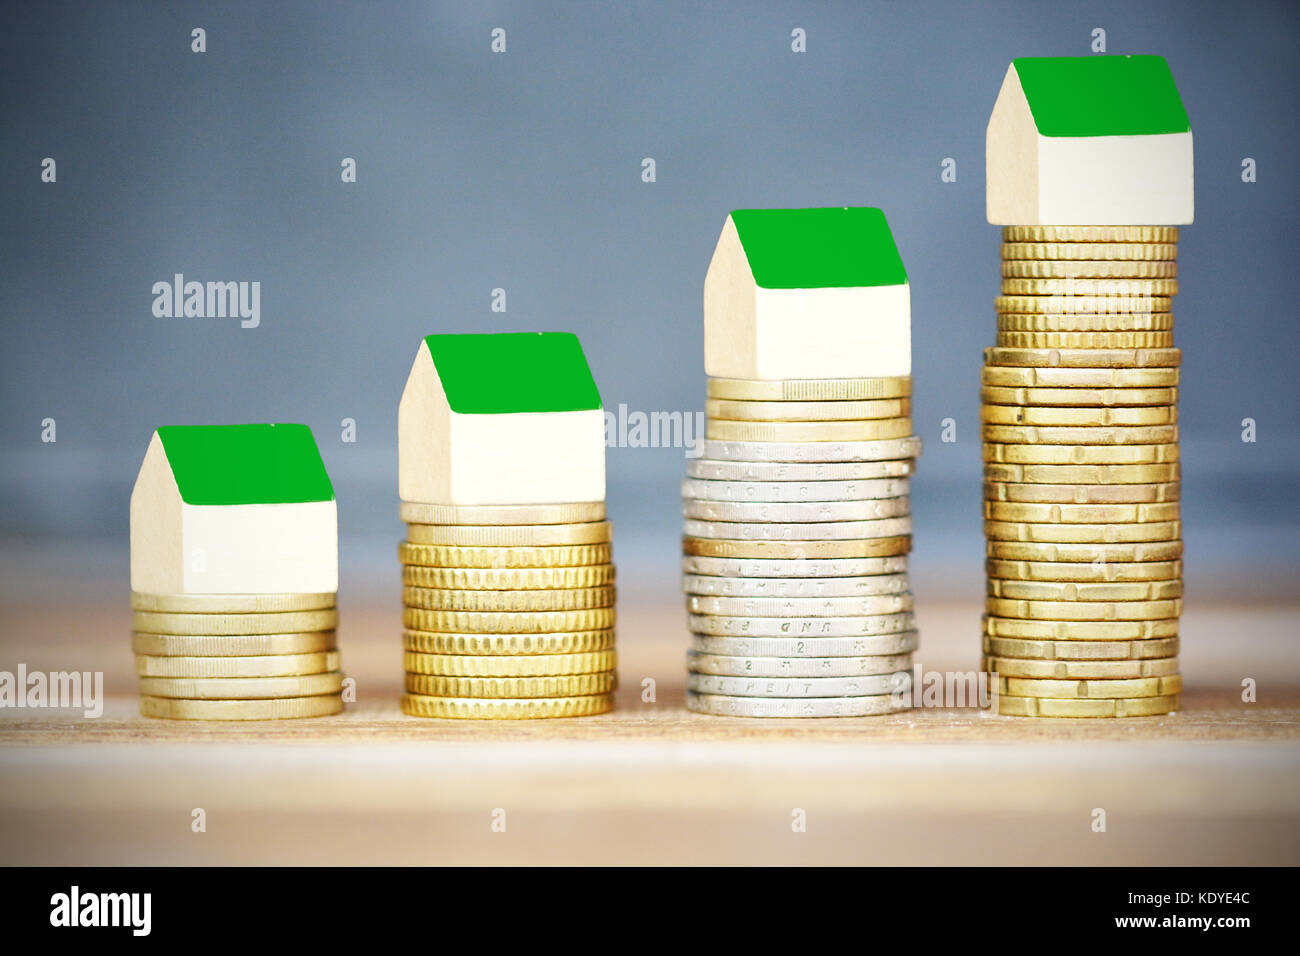 Real estate price evolution concept with miniature wooden houses on ascending piles of money Stock Photo